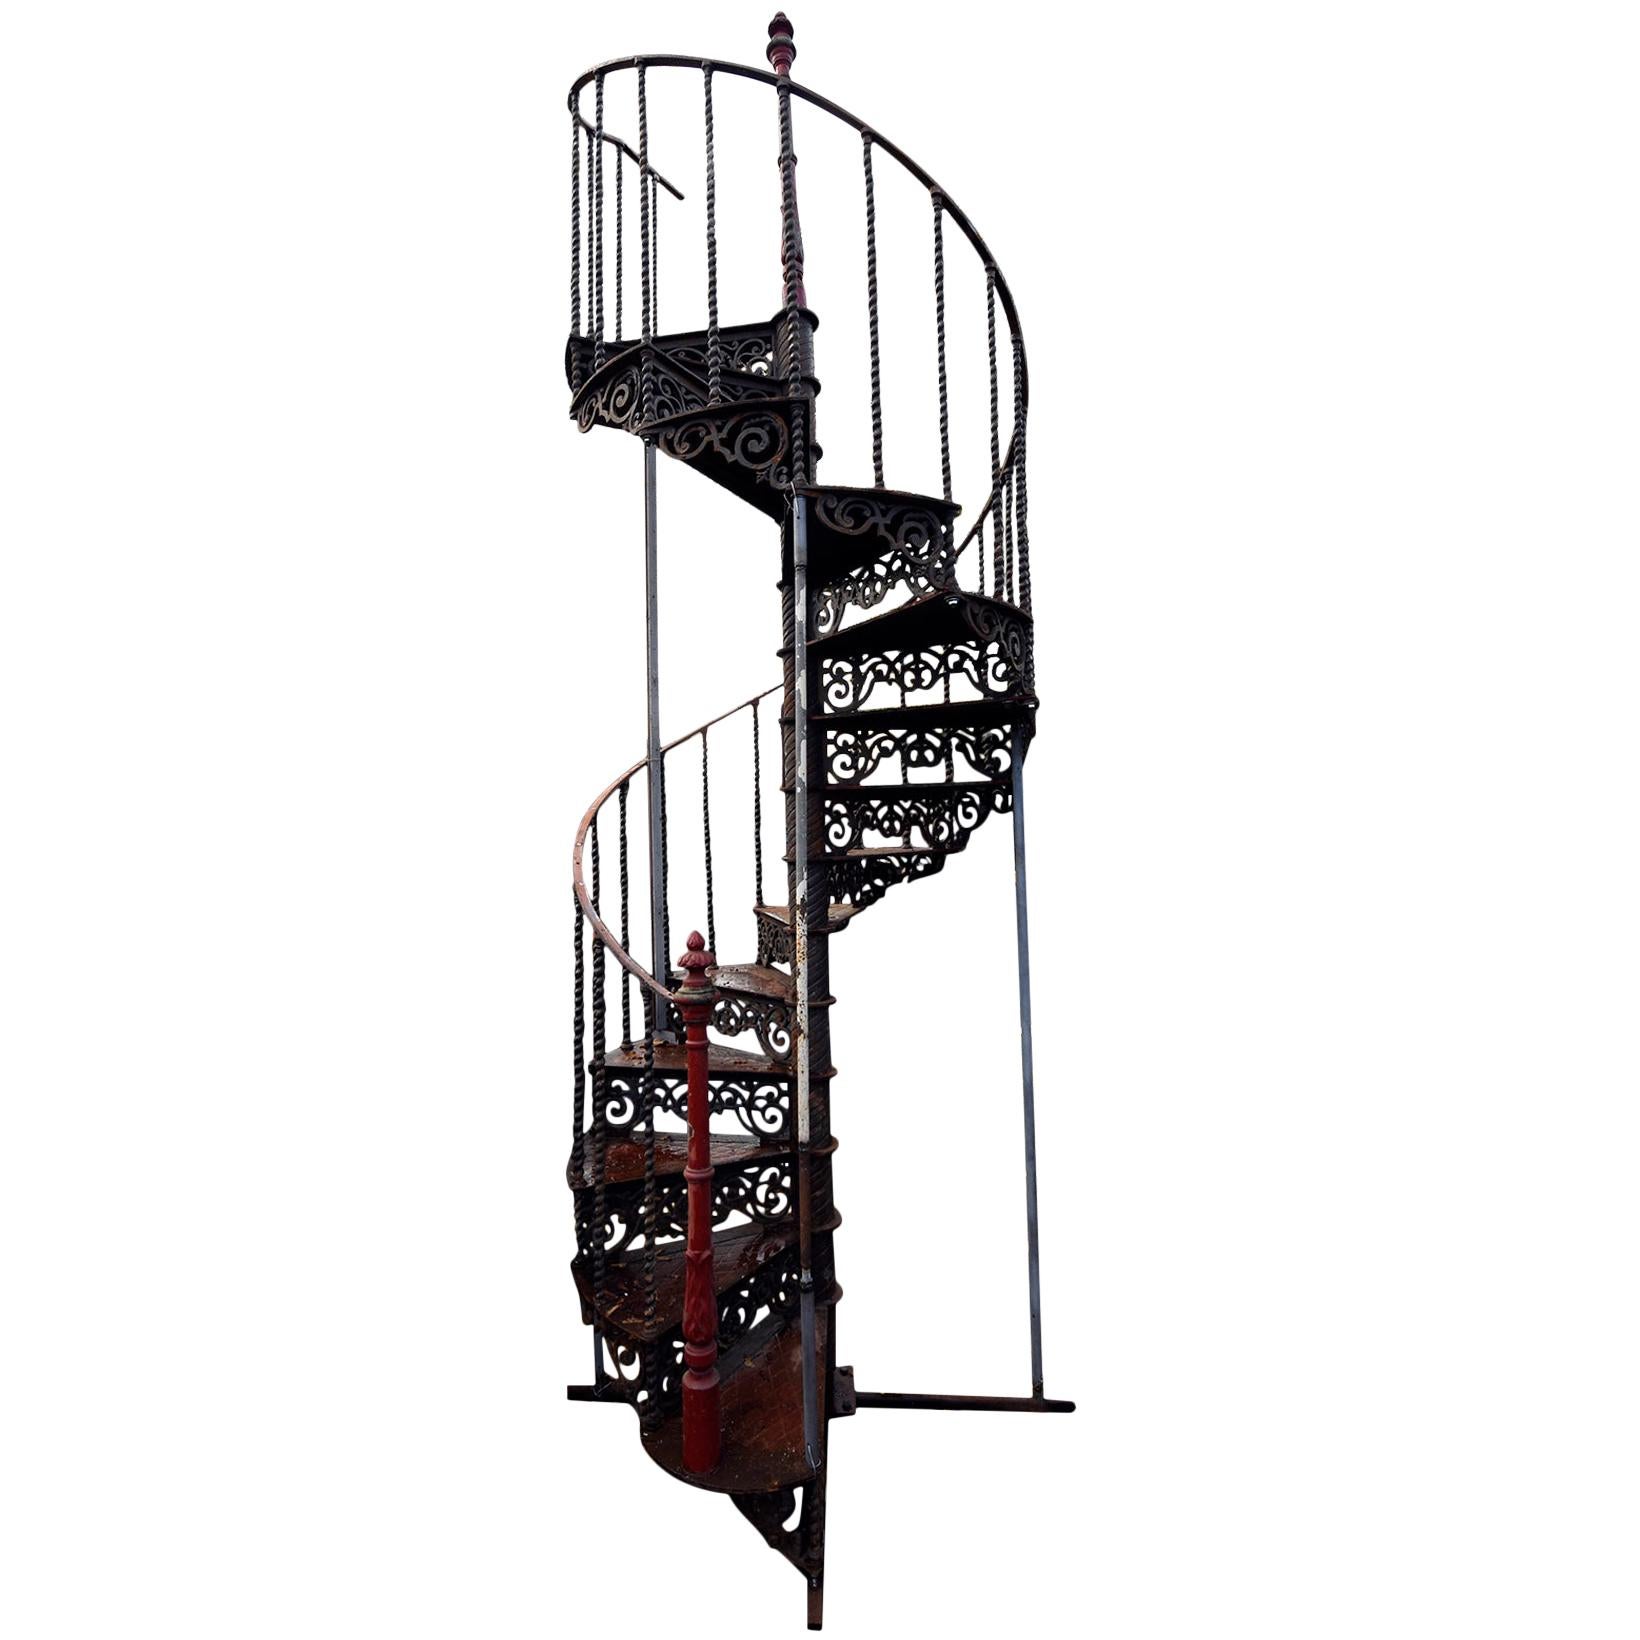 A very nice and heigh 19th century cast iron spiral staircase.
Measurements:
Height 390 cm.
Diameter 130 cm.

This stair comes from a mansion near Paris, France.
Ideal for big spaces like Lofts, hotels, or other large rooms.
It can be easily